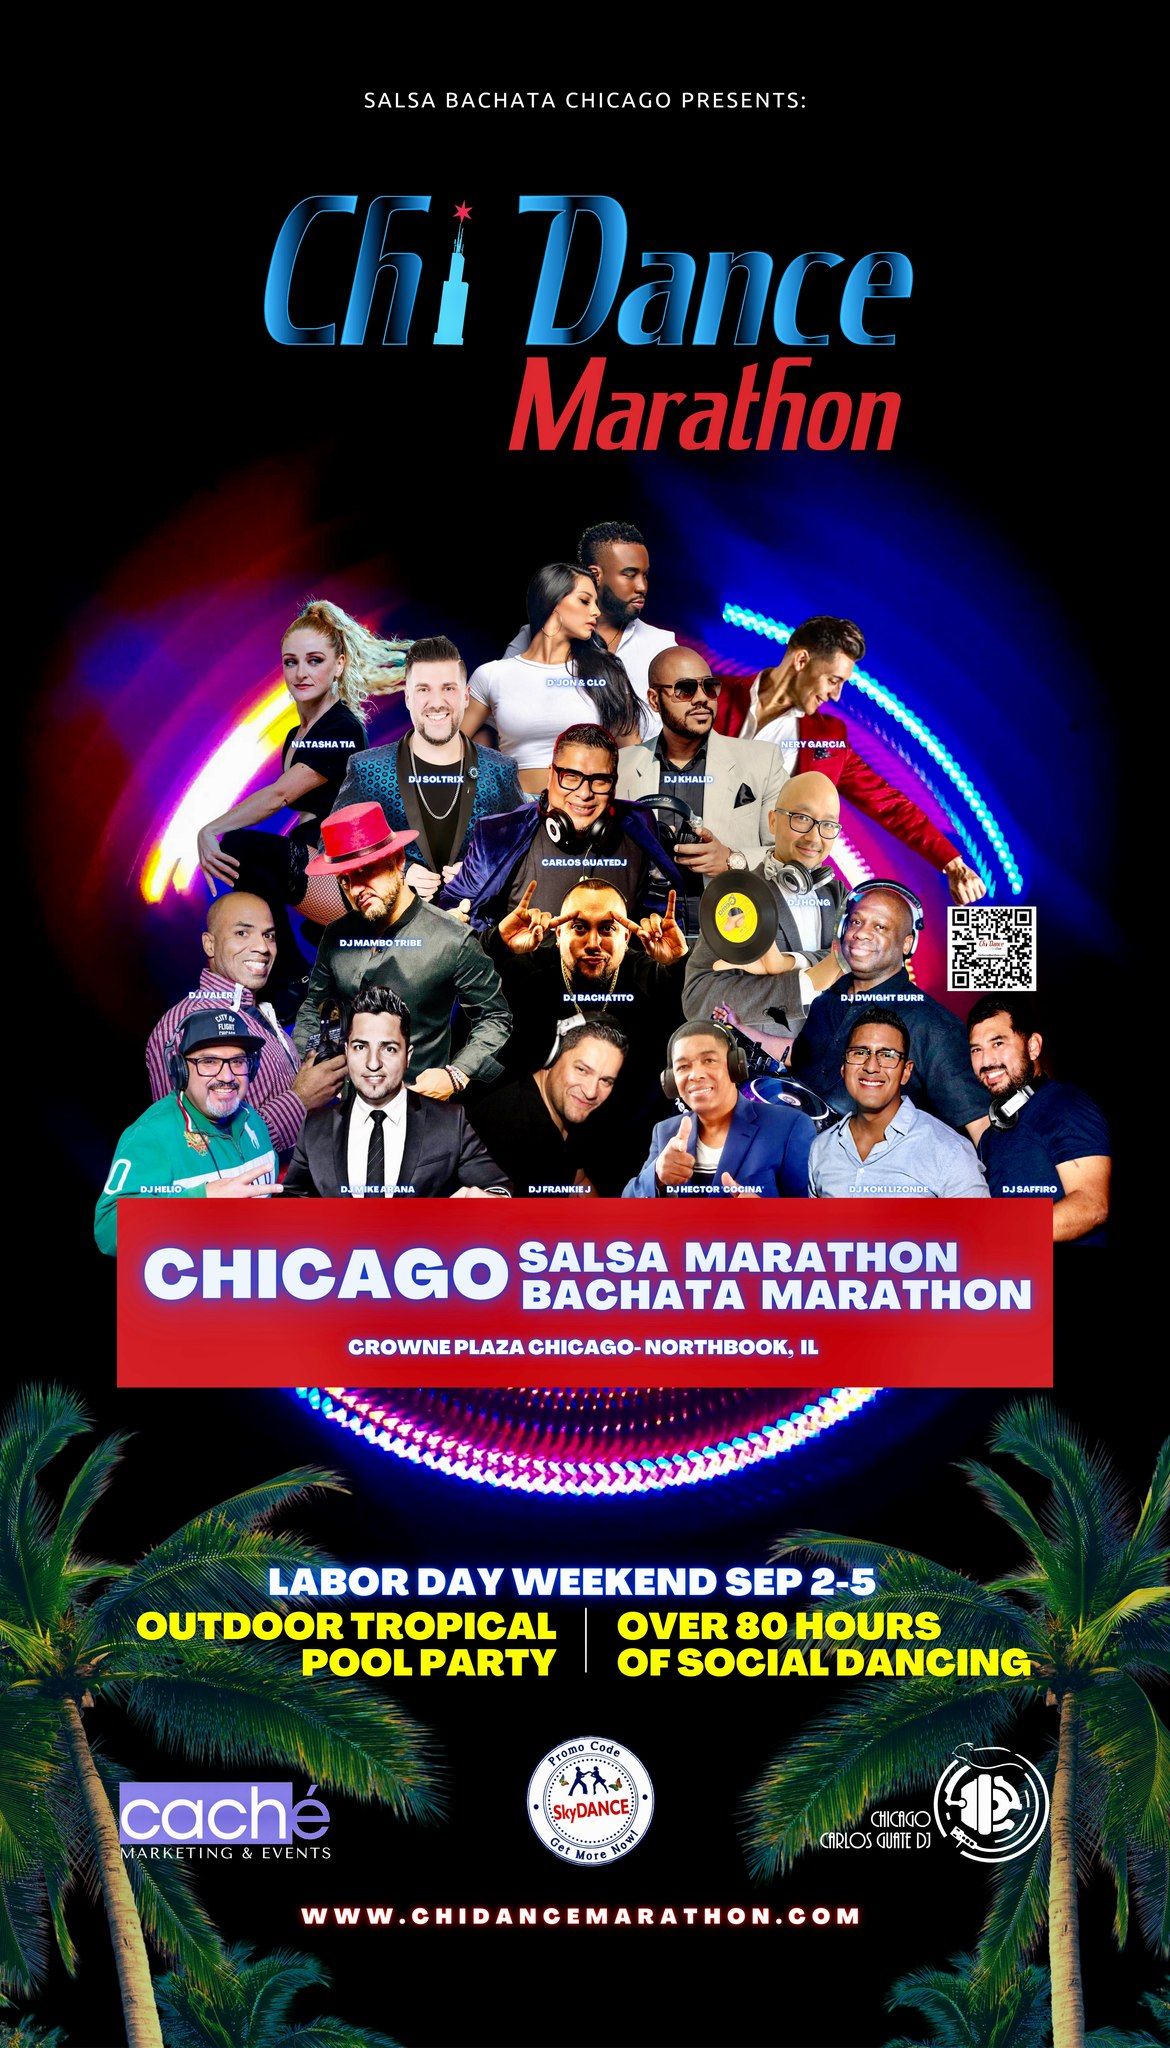 Chi Dance Marathon - Salsa and Bachata - with a Tropical Outdoor Pool Party for Labor Day Weekend